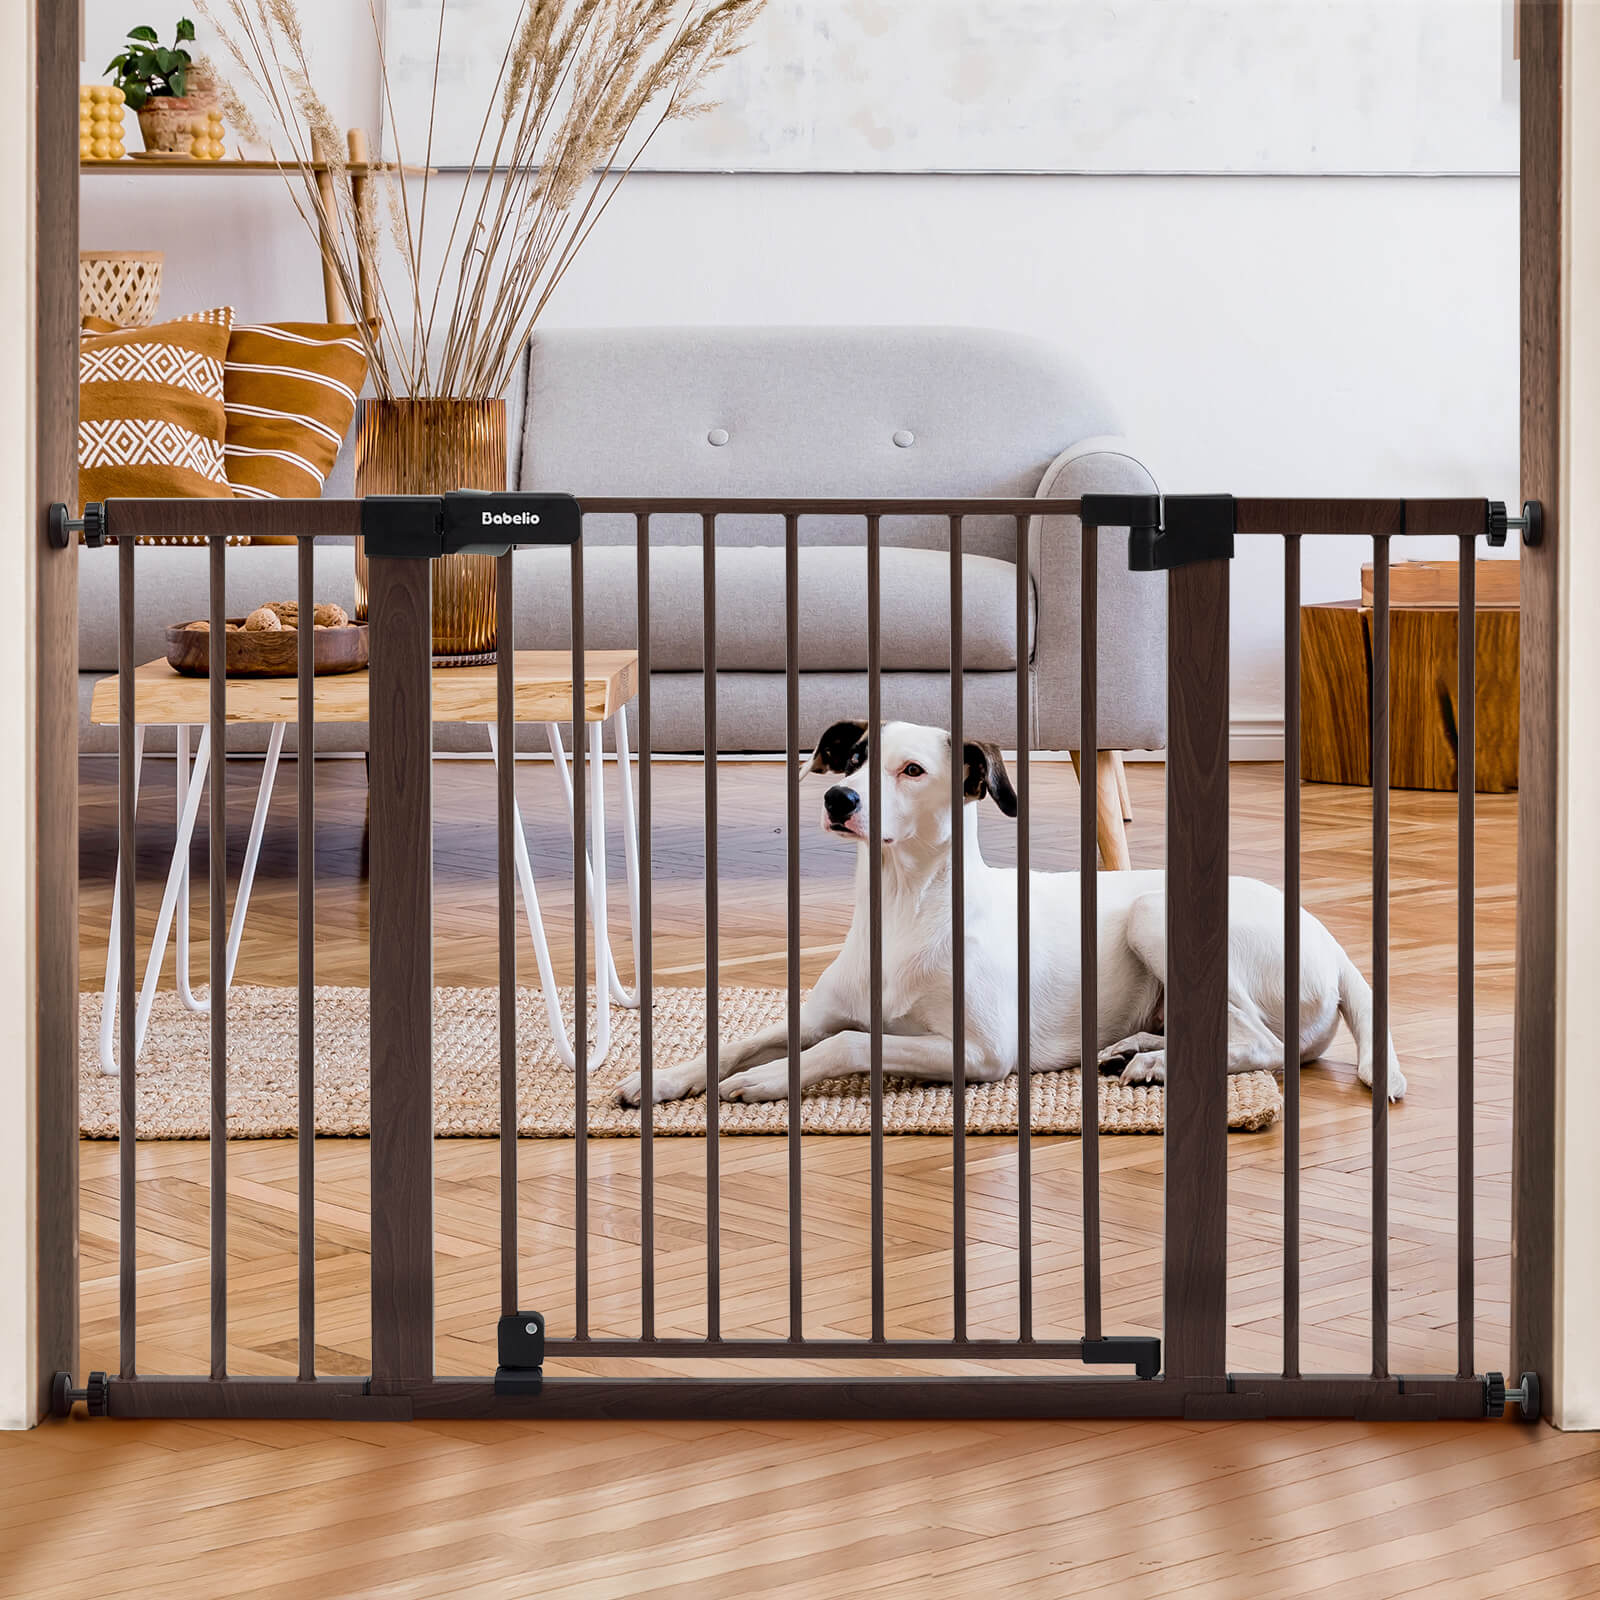 Babelio 30" High Adjustable Metal Baby/Pet Gate with Door – 29-48" Wide, Auto-Close, Wood Pattern, Easy Install